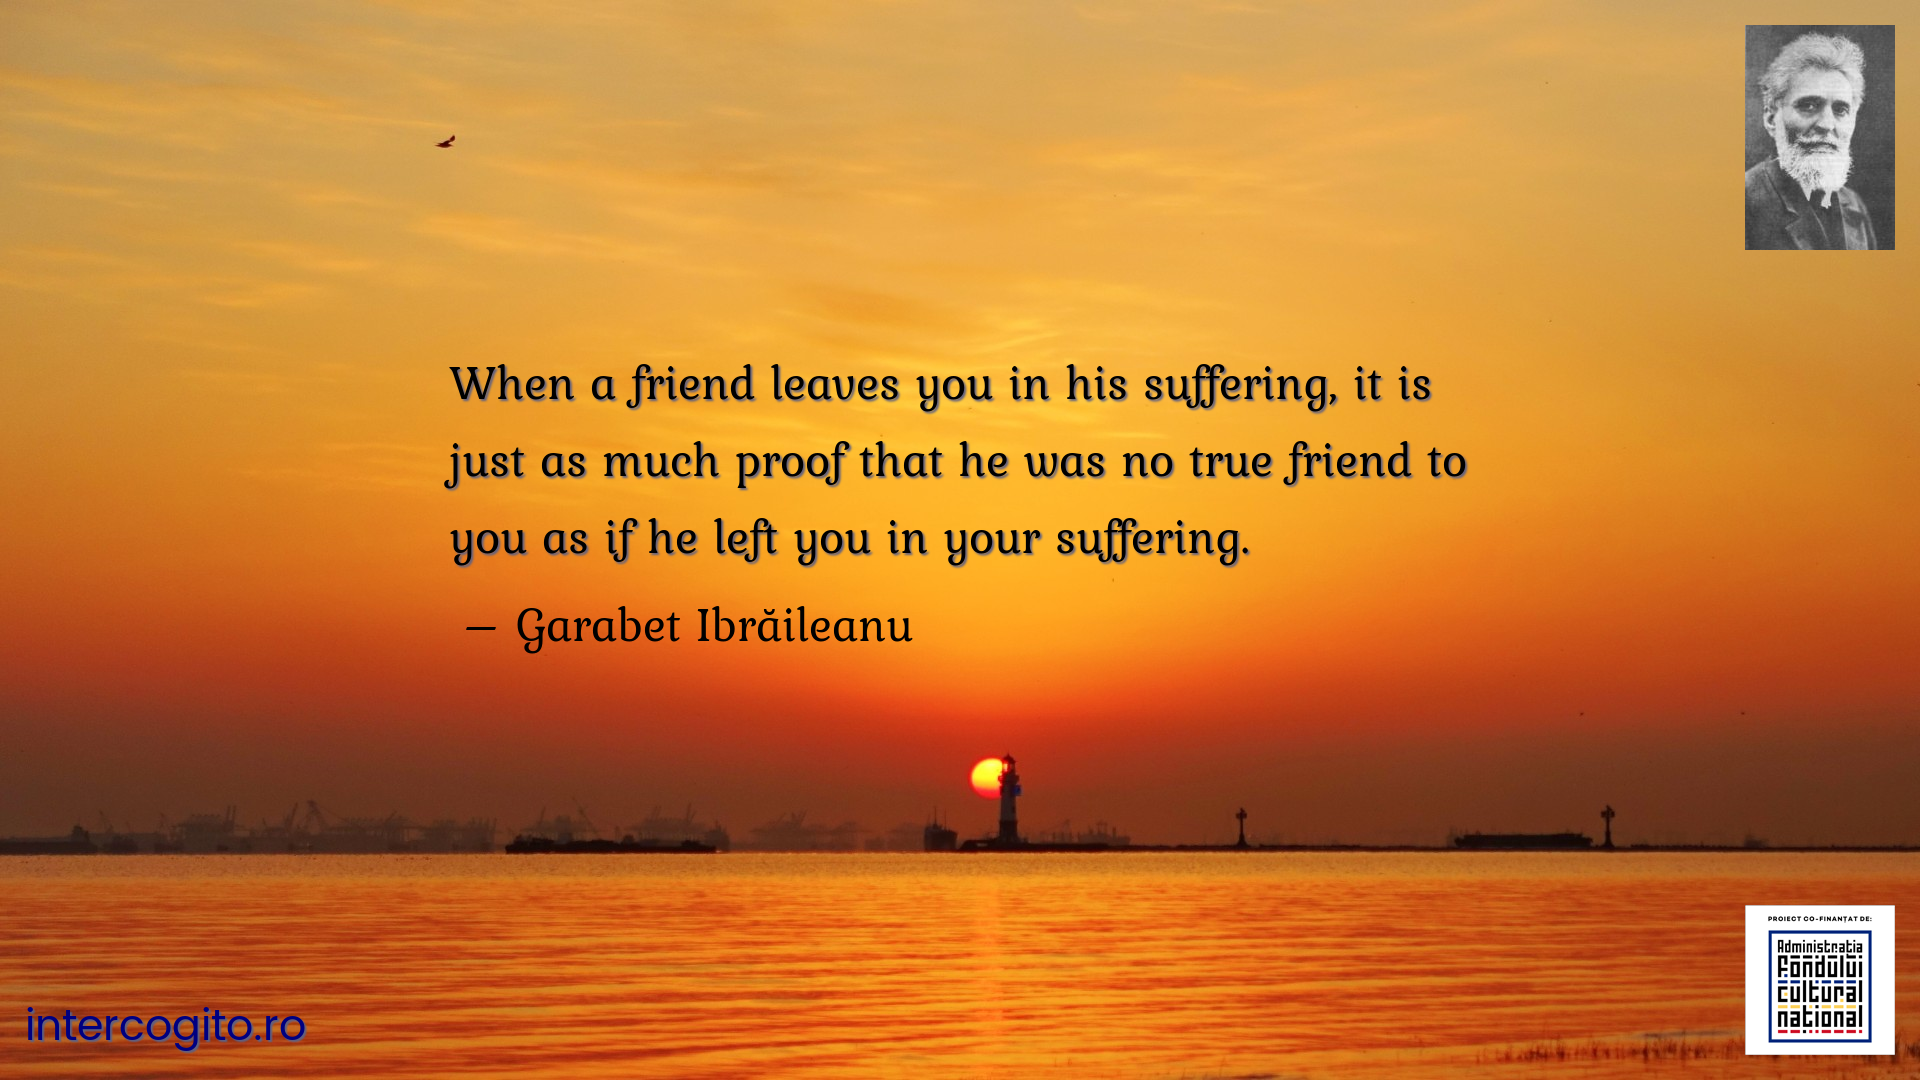 When a friend leaves you in his suffering, it is just as much proof that he was no true friend to you as if he left you in your suffering.